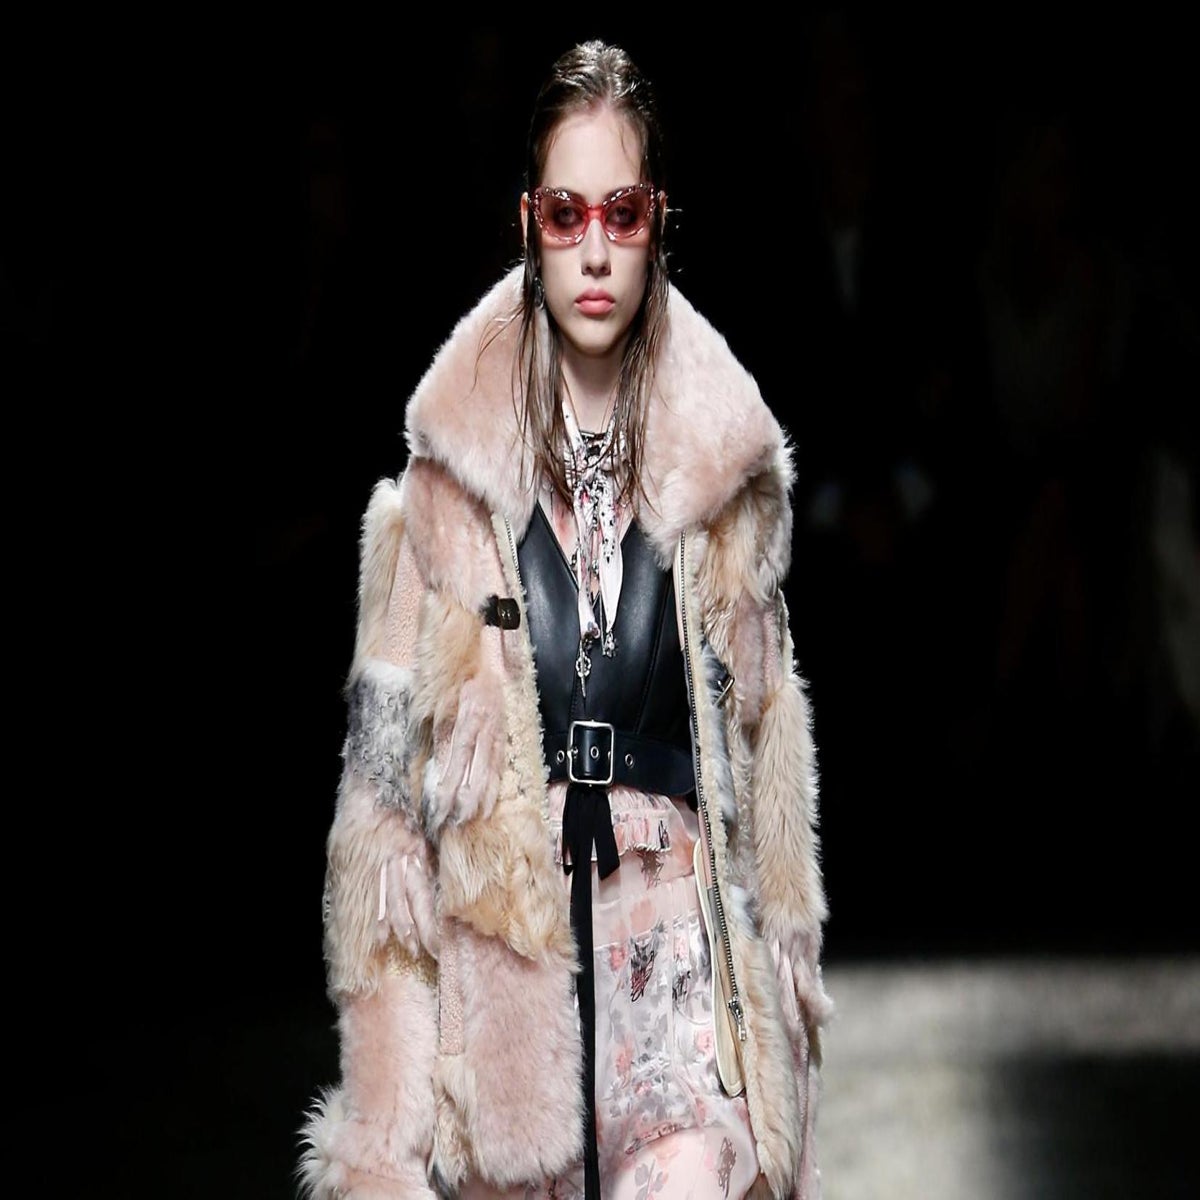 https://static.independent.co.uk/s3fs-public/thumbnails/image/2018/10/23/15/coach-fur-free-fashion.jpg?width=1200&height=1200&fit=crop